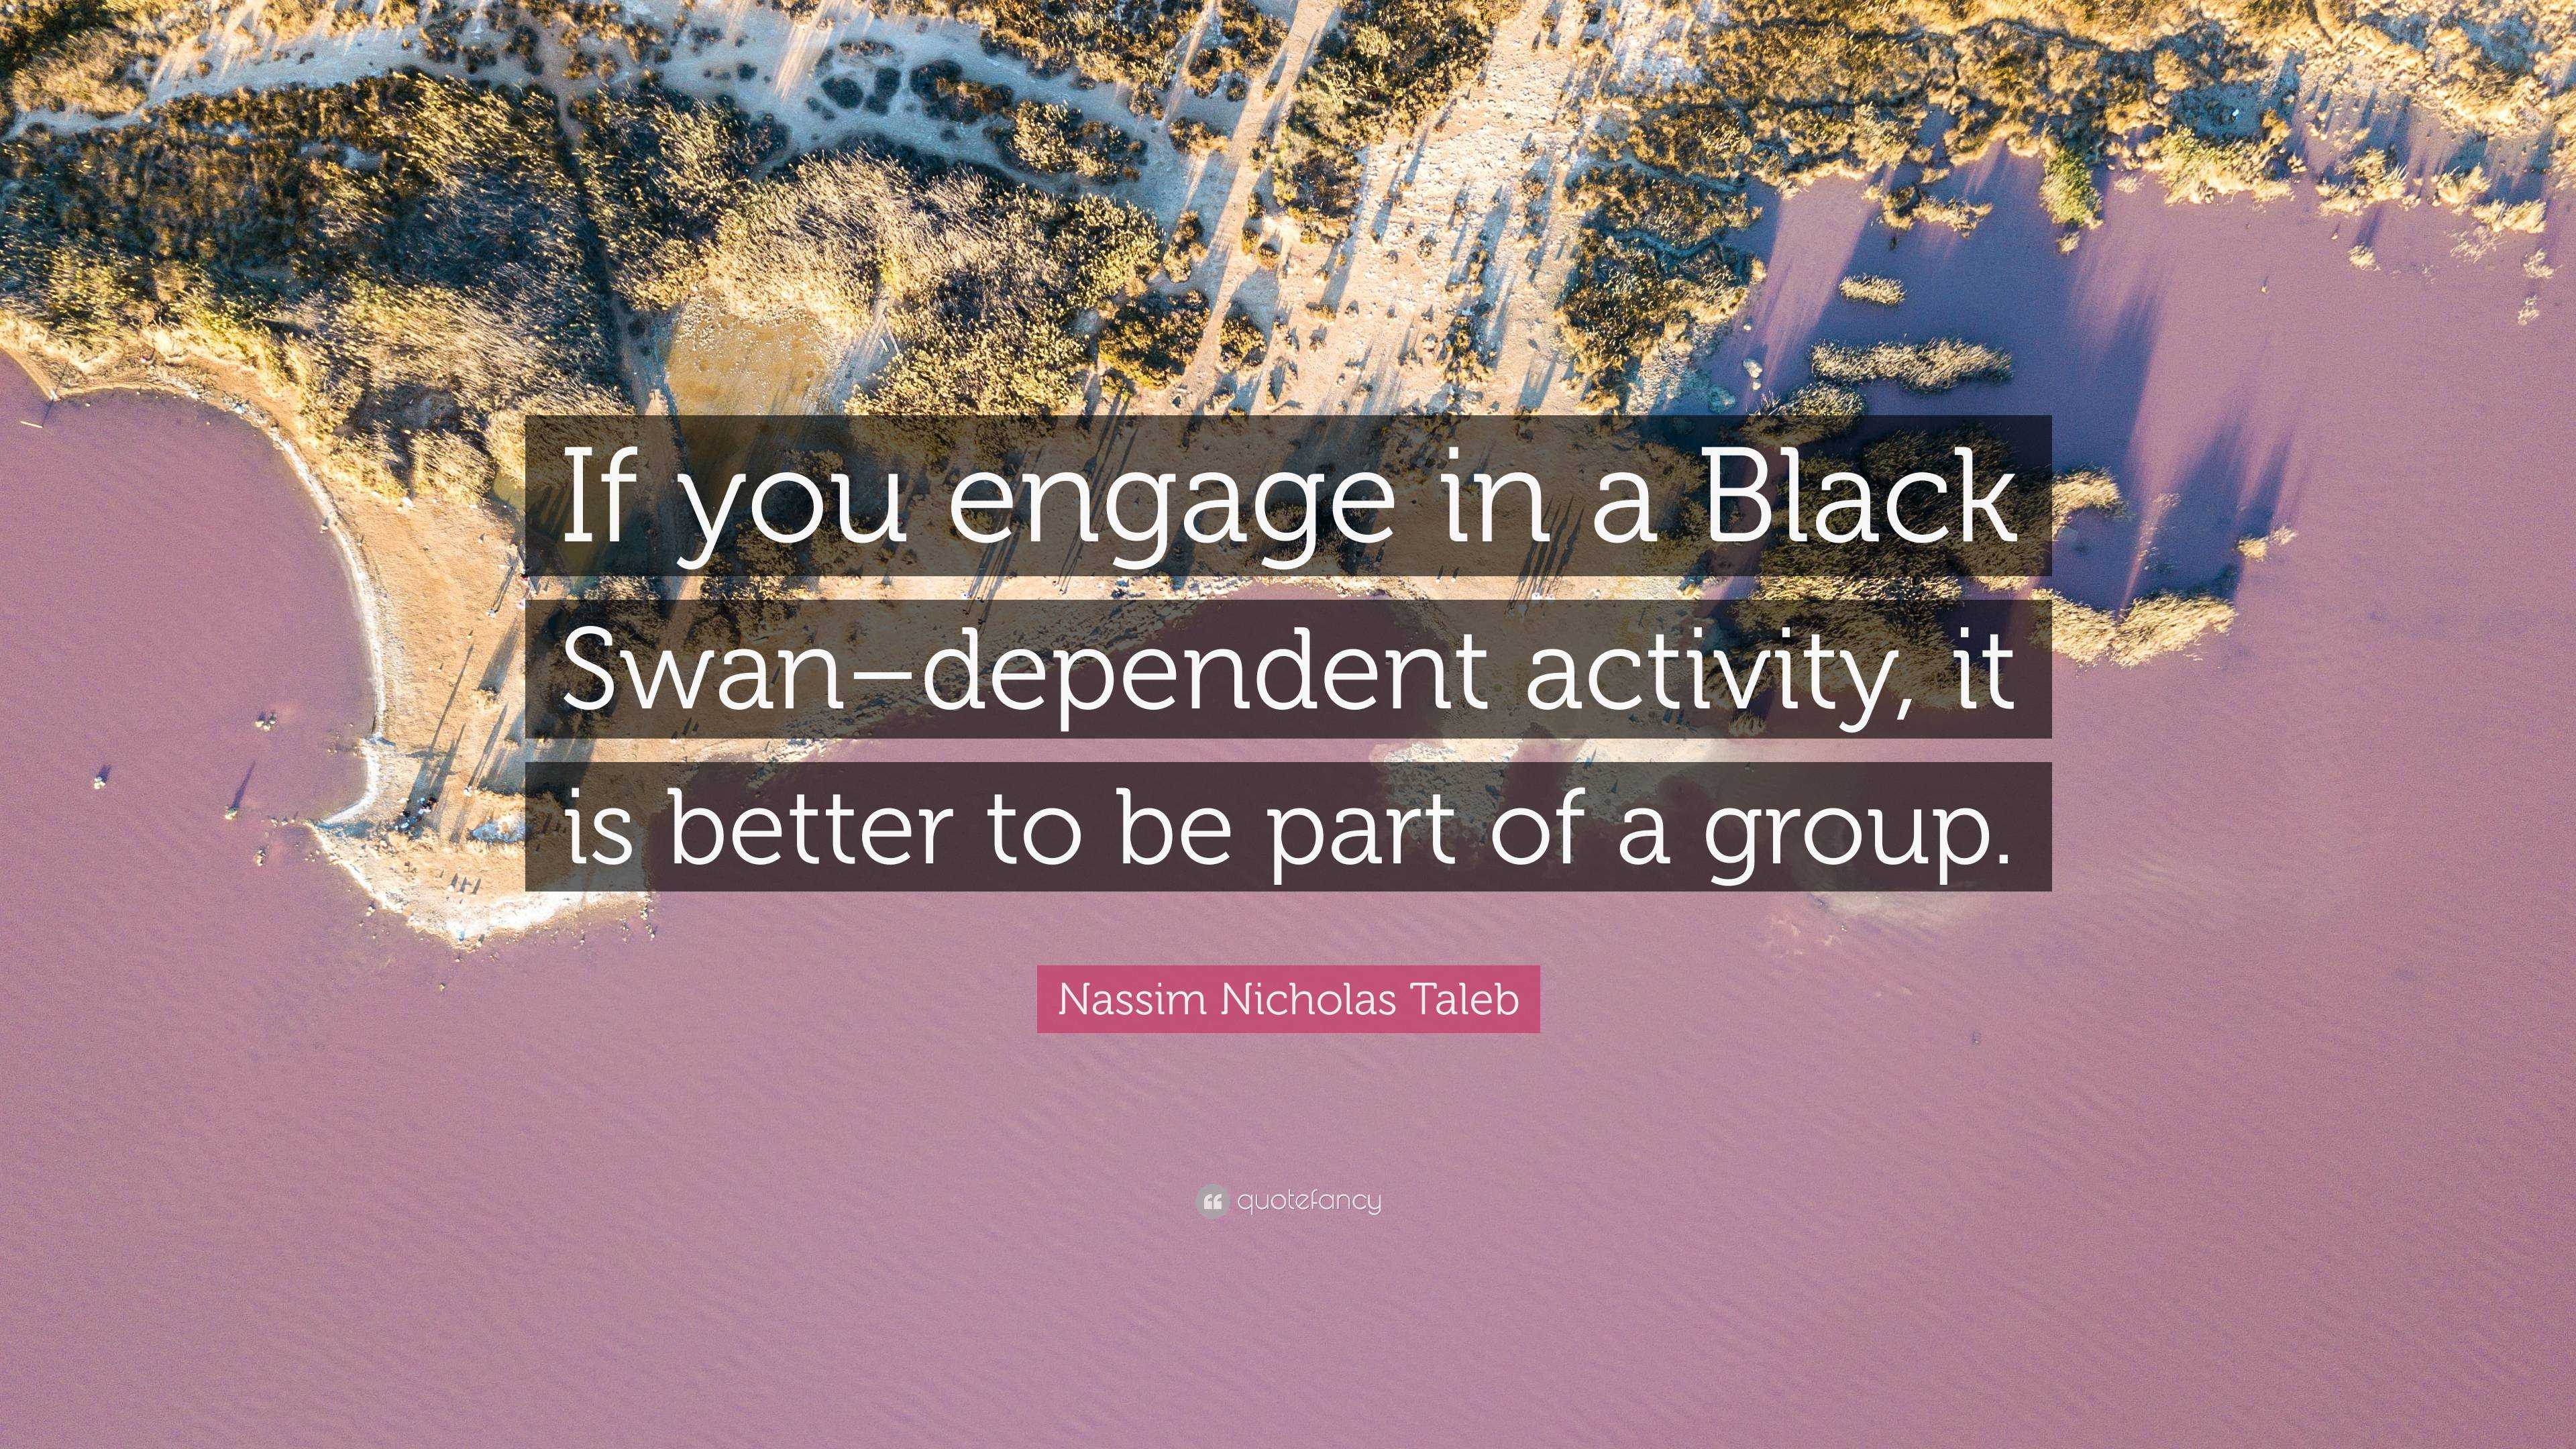 Nassim Nicholas Quote: “If you engage in Swan–dependent activity, it is better